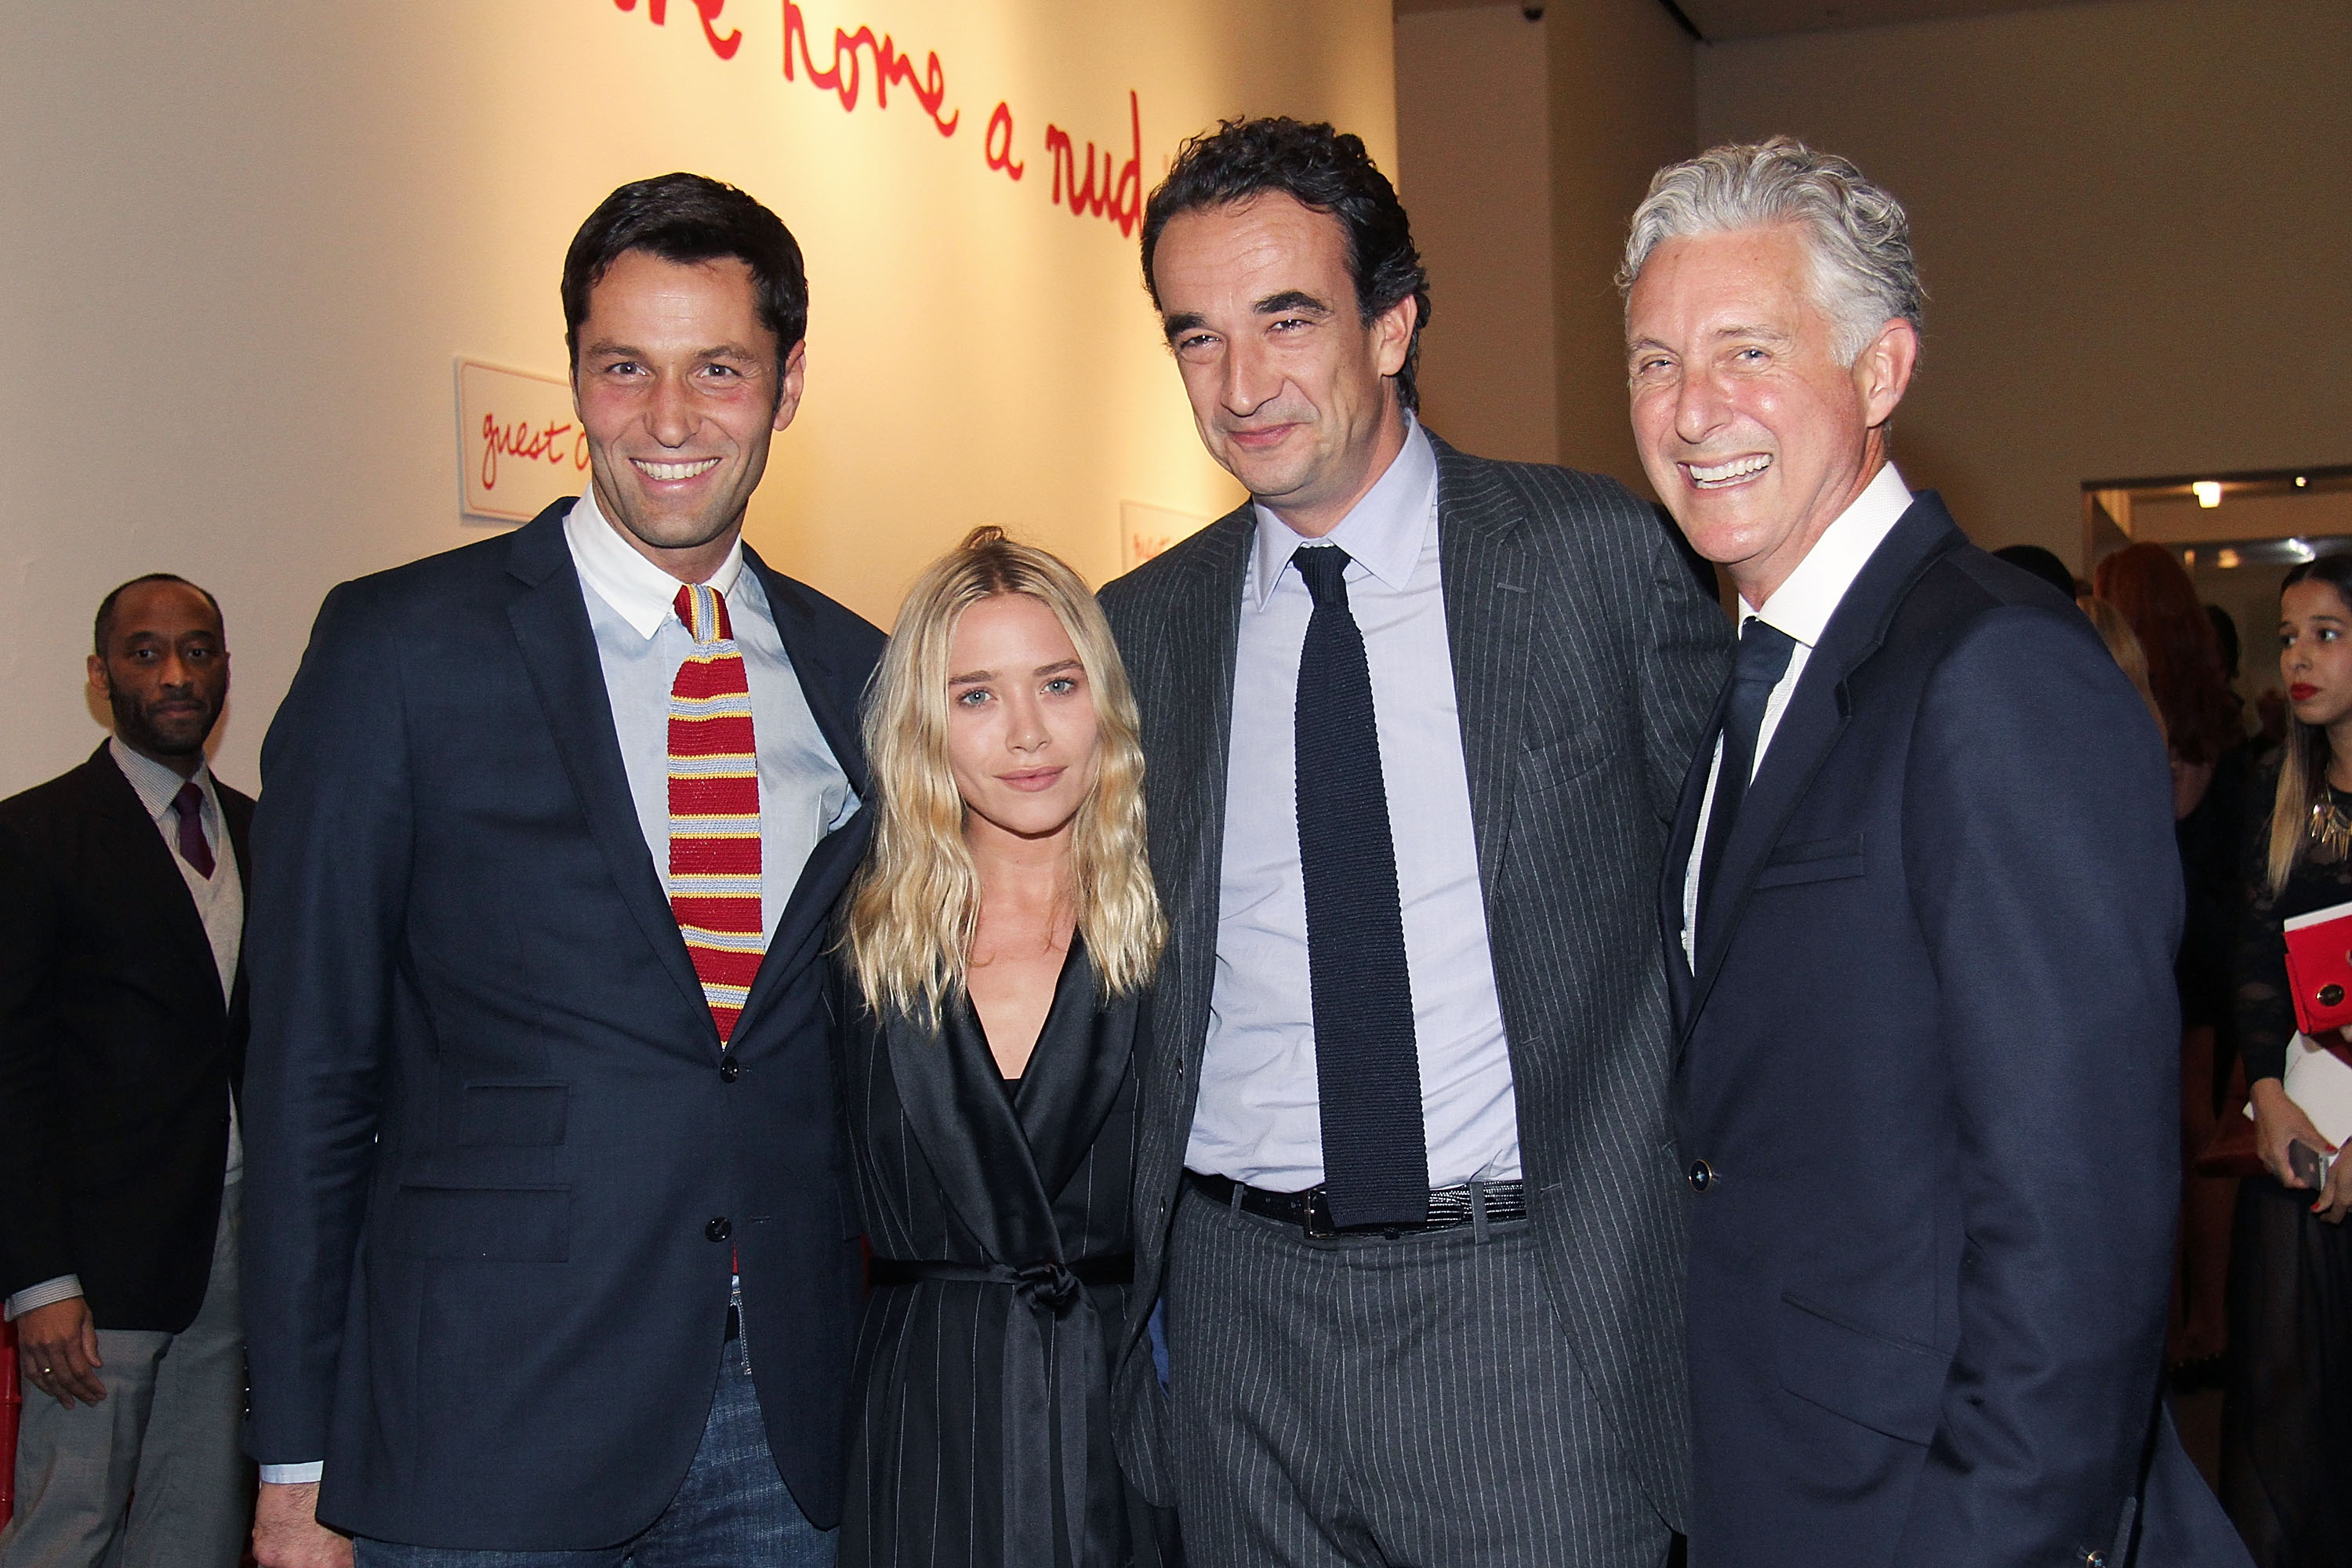 Mary Kate Olsen Oliver Sarkozy and David Kratz attend the 2013 "Take Home A Nude" Benefit Art Auction And Party at Sotheby's on October 8, 2013 in New York City.  | Source: Getty Images